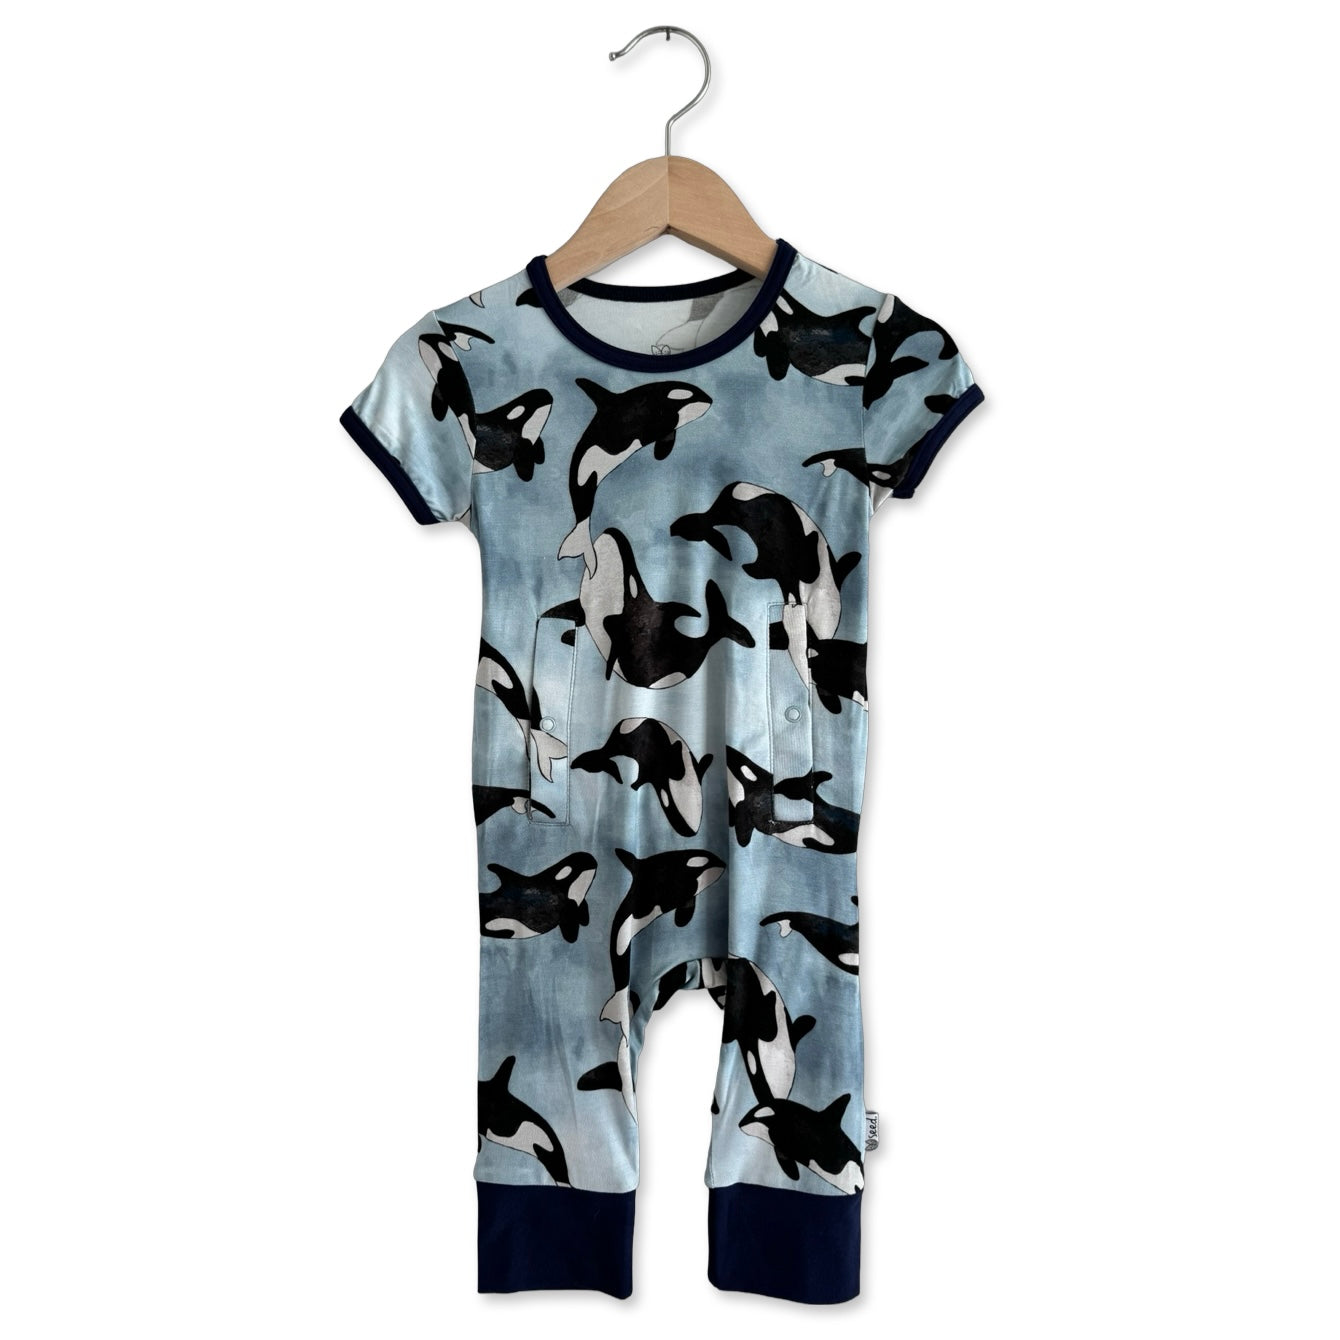 Save the Whales Adaptive Tube Access Kid Short Long Romper